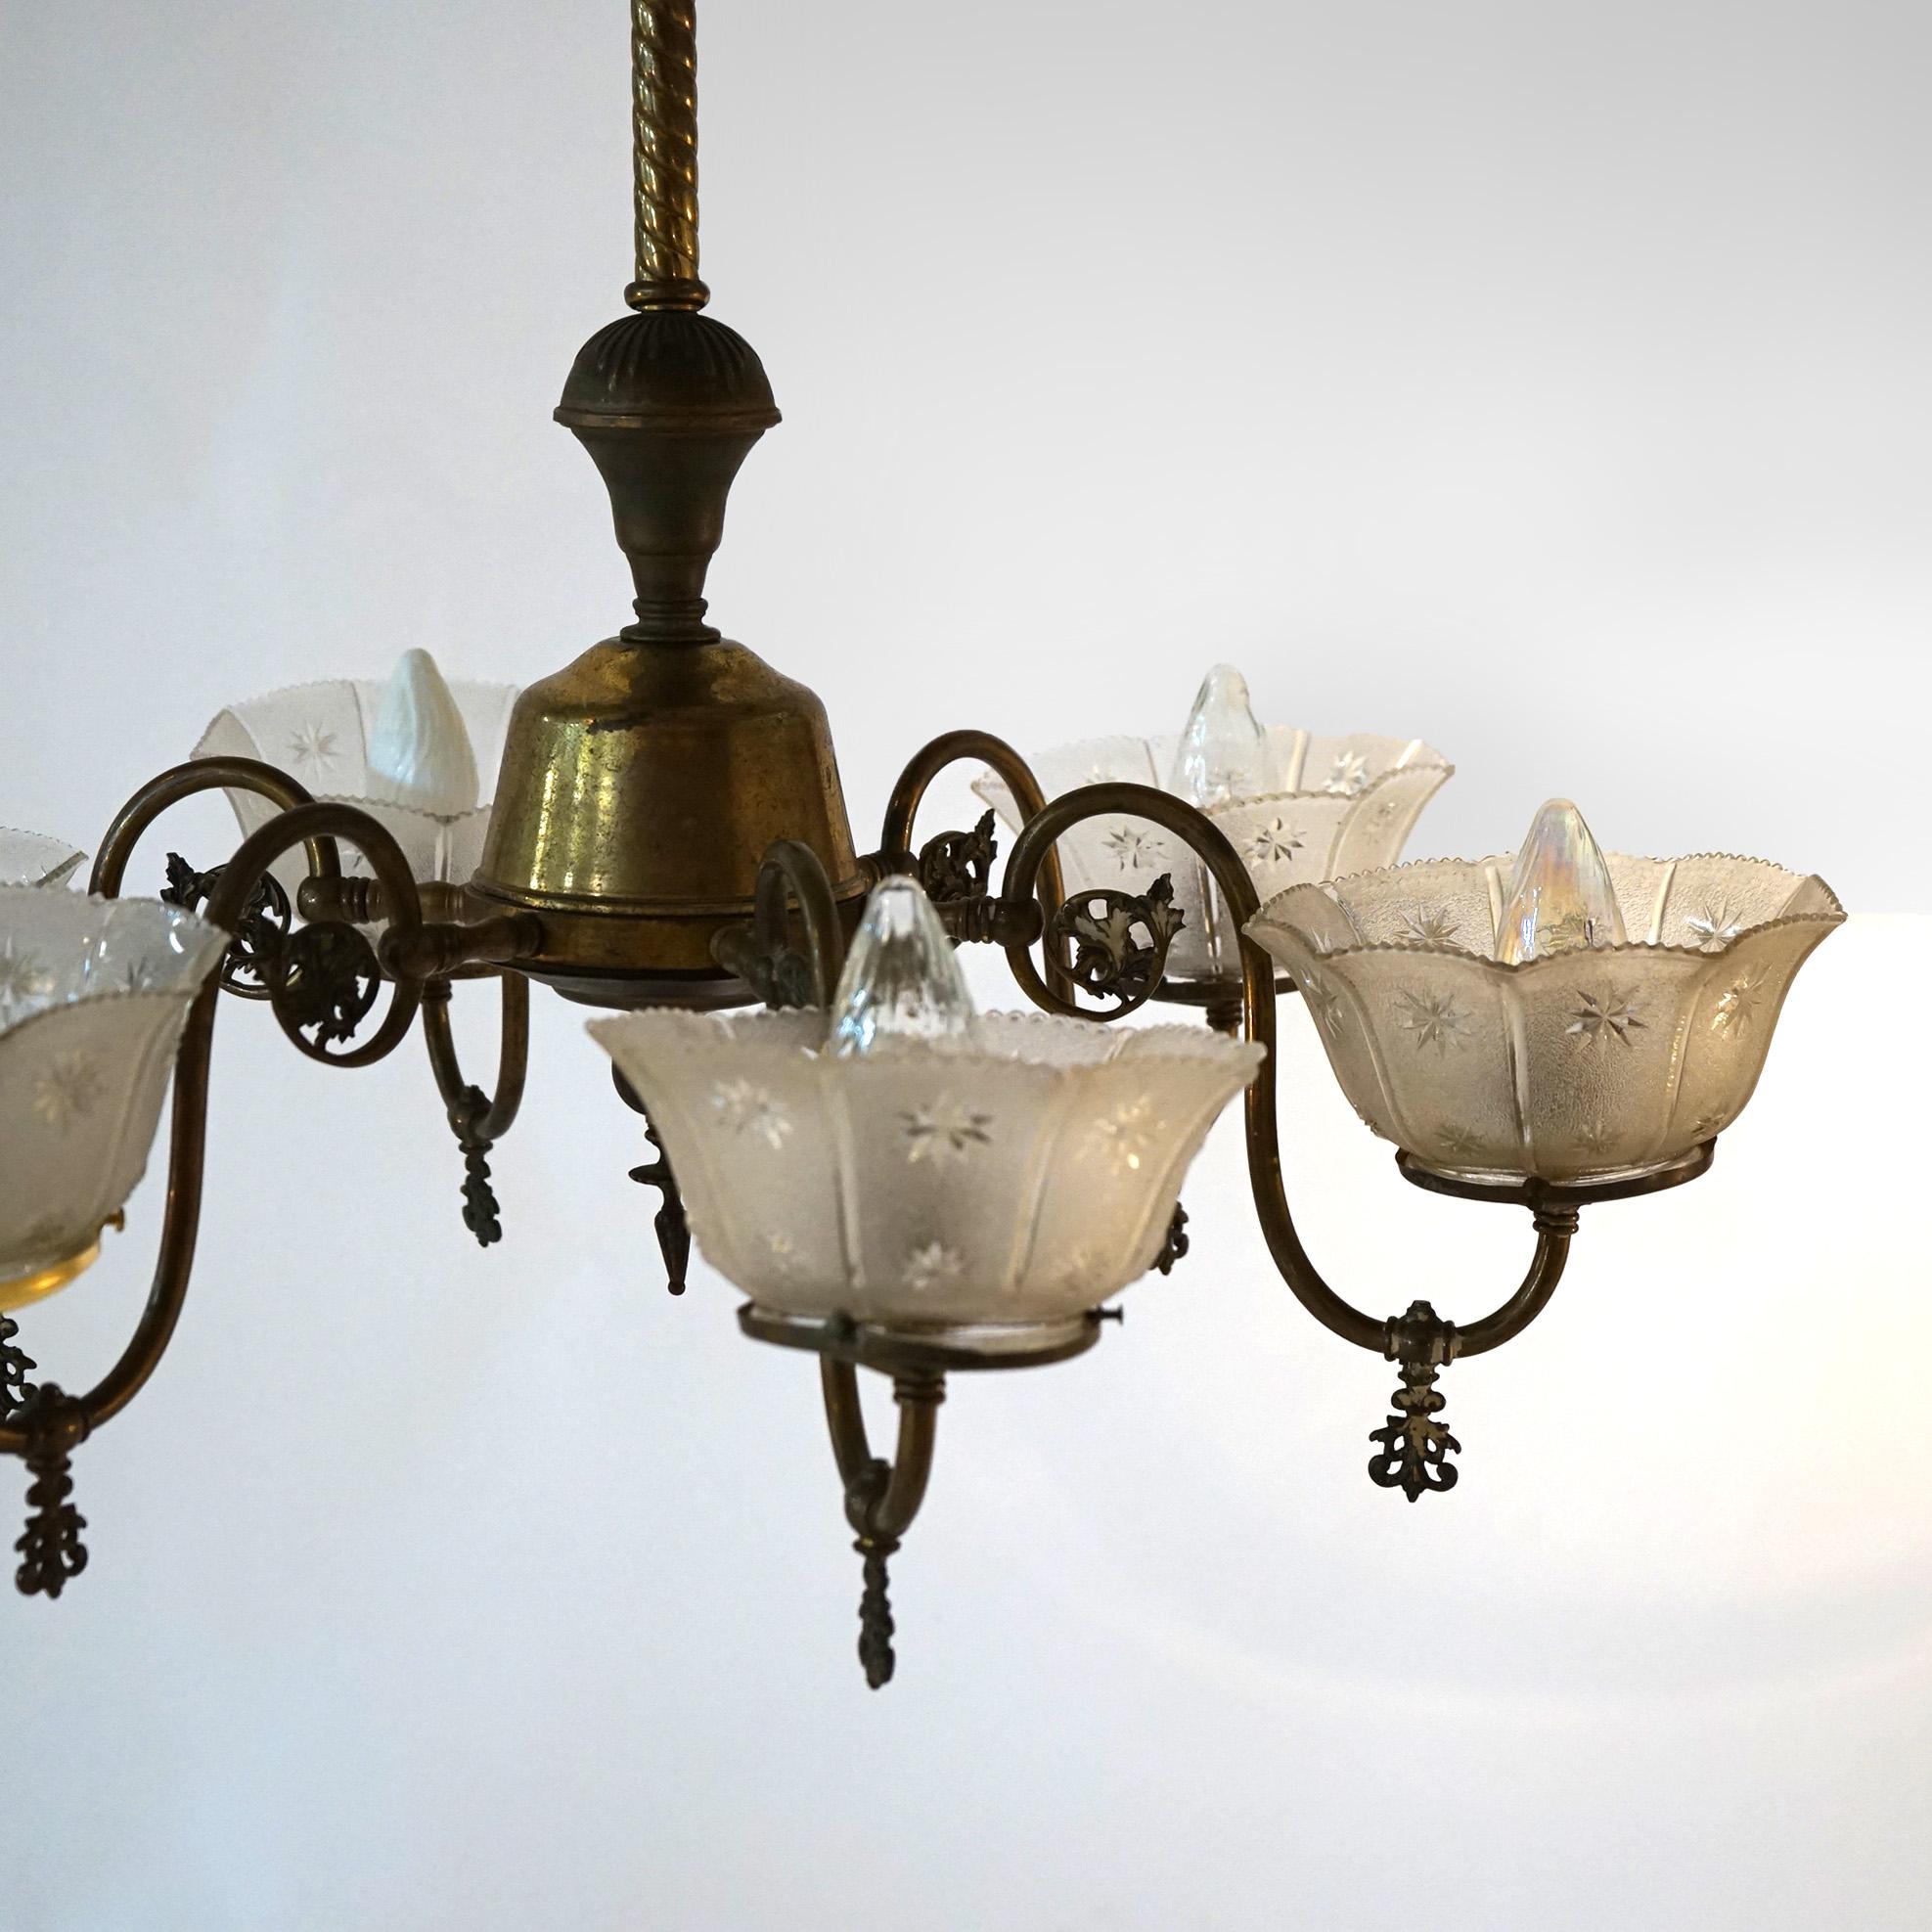 Antique Six Arm Brass Gas Chandelier with Glass Shades, Electrified, Circa 1890 14